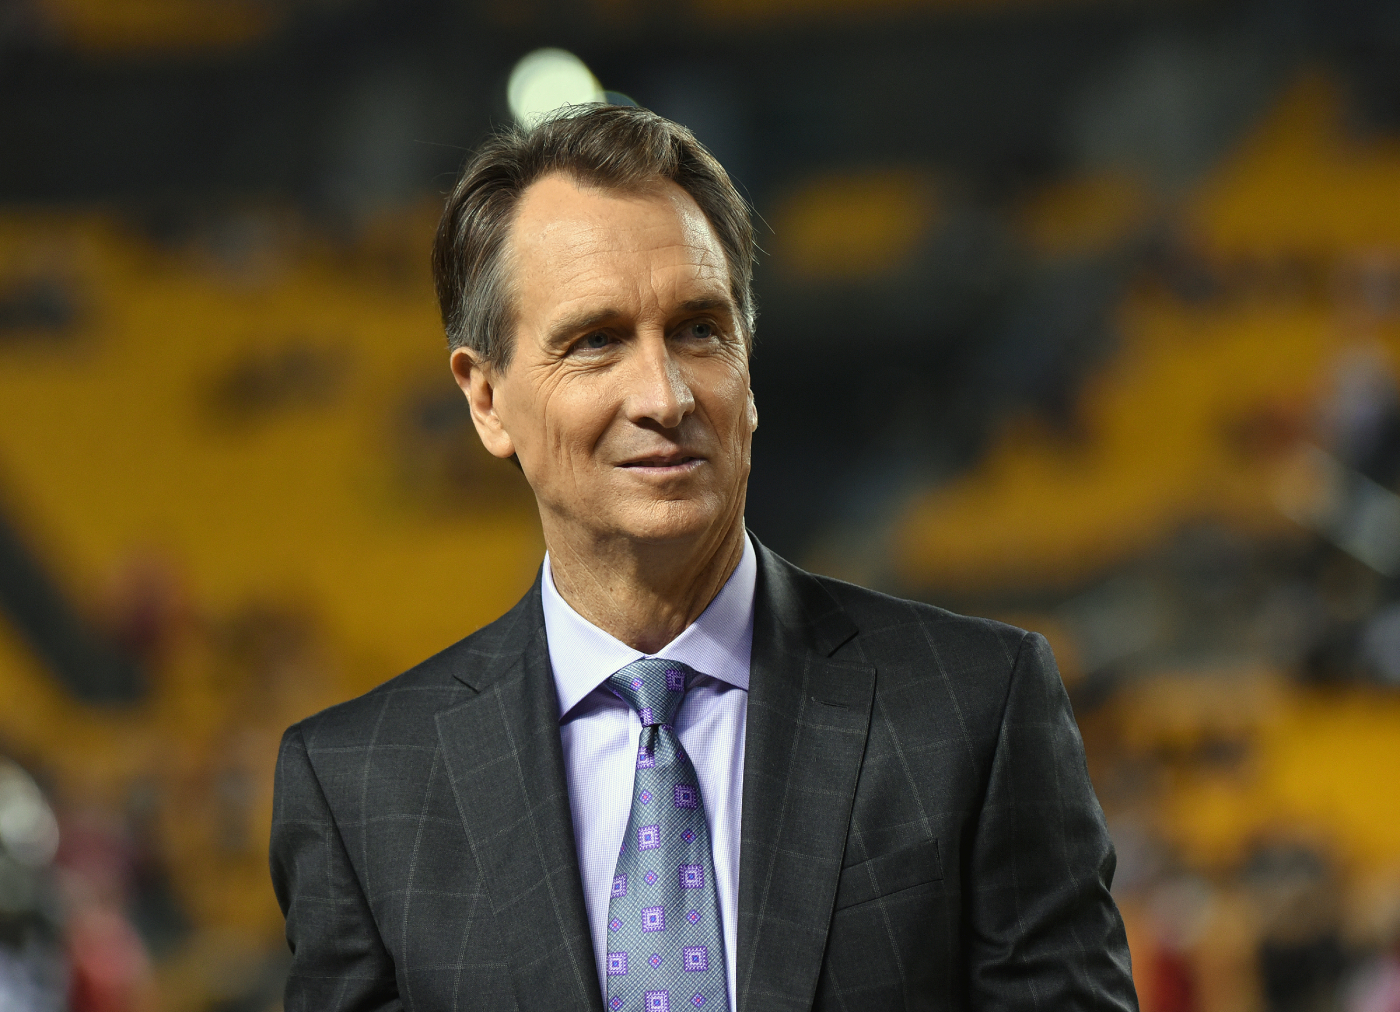 Cris Collinsworth has been a successful football player and broadcaster. His son, Jac Collinsworth, is now following in his footsteps.